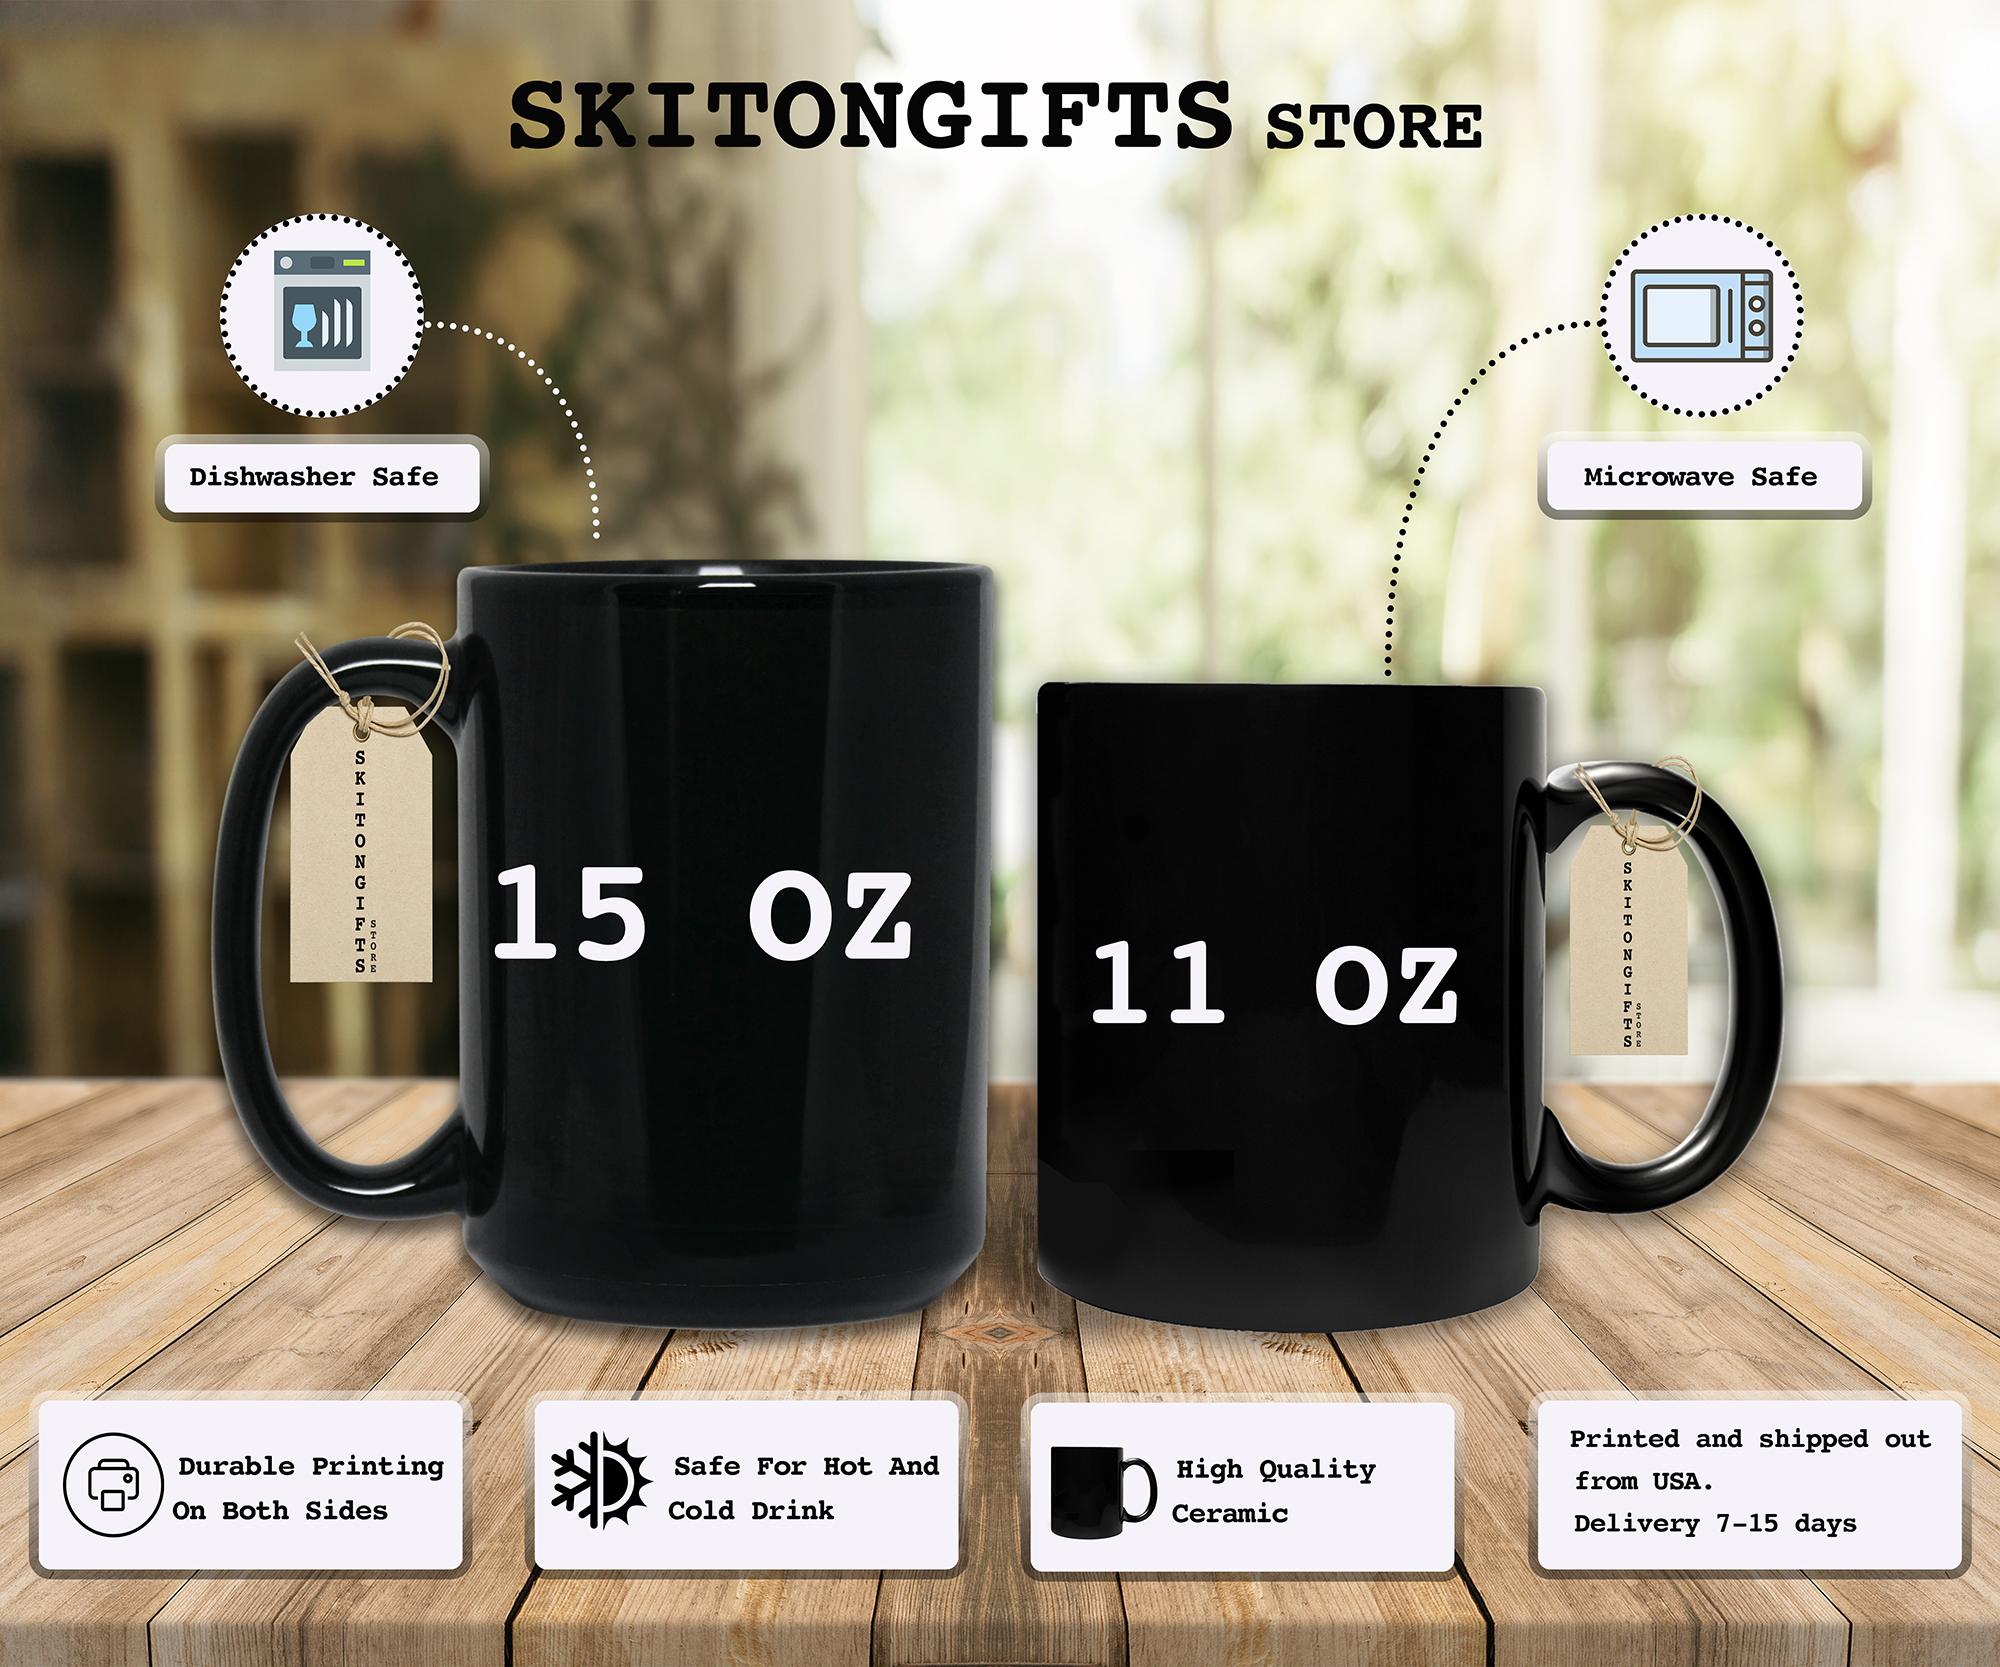 Skitongifts Funny Ceramic Coffee Mug For Birthday, Mother's Day, Father's Day, Christmas NH261121-Oh For Fucks Sake Kf0Cp3W